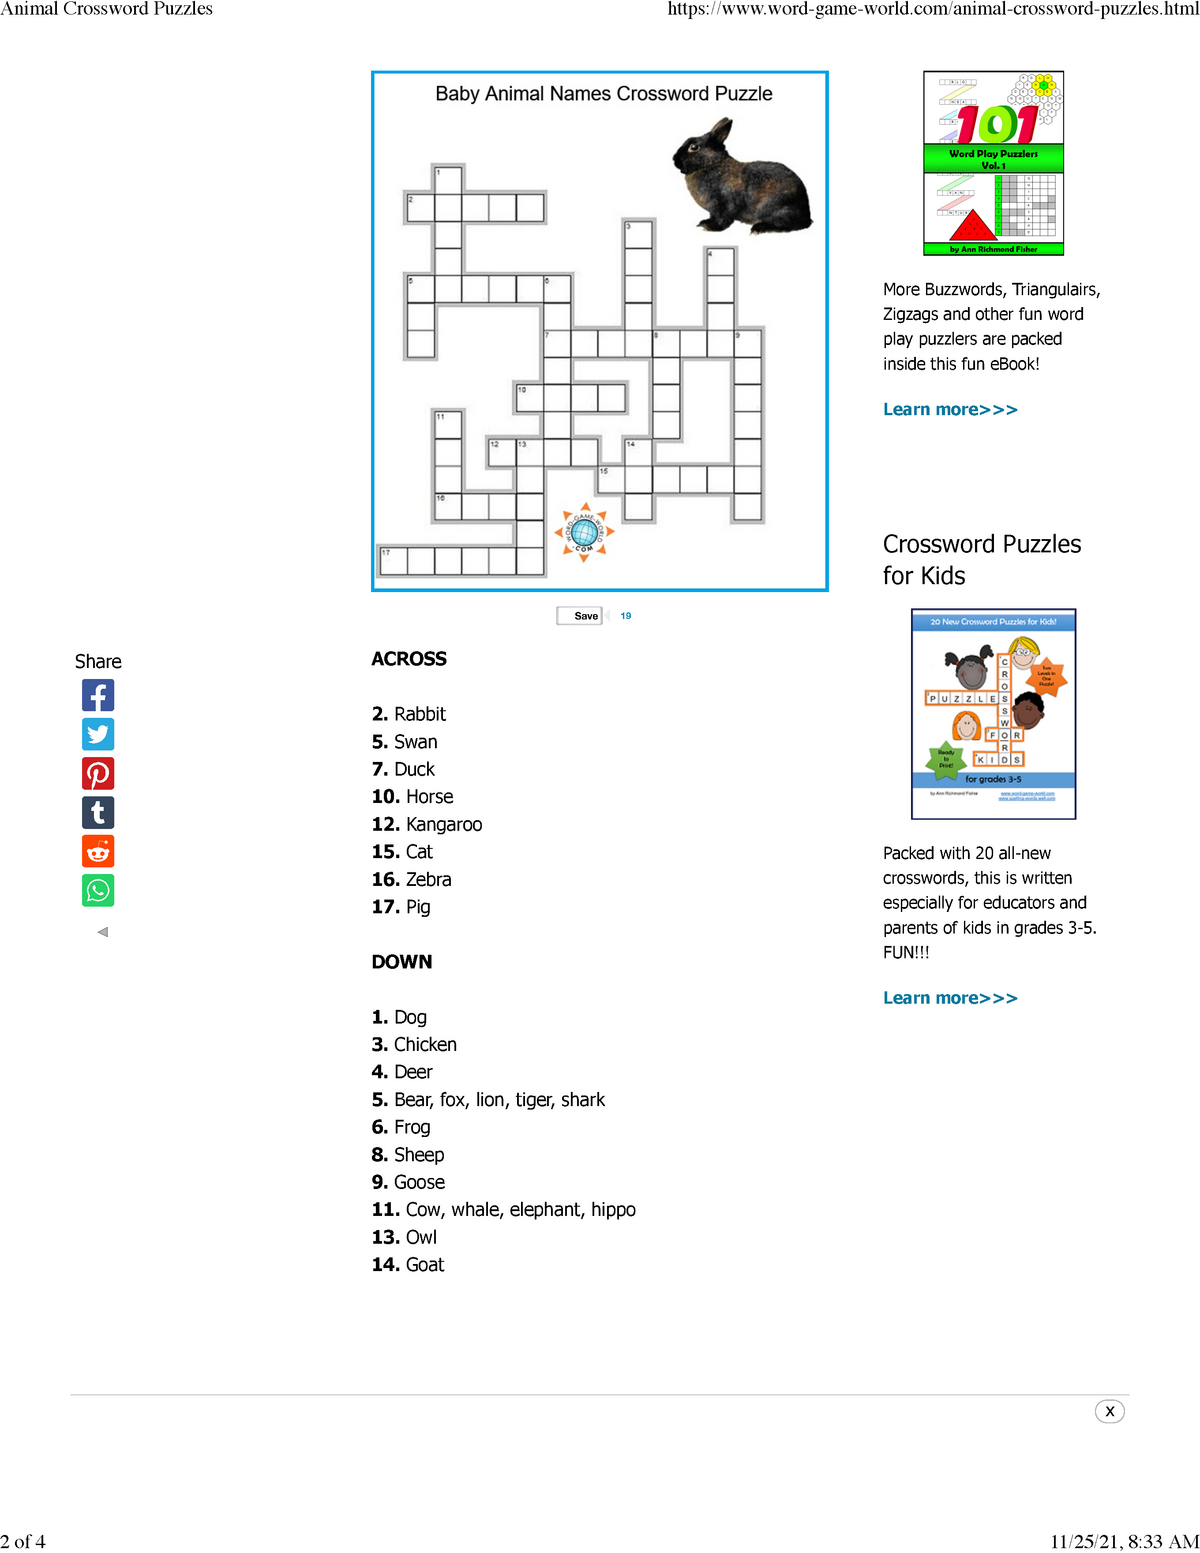 Animal Crossword Puzzles More Buzzwords Triangulairs Zigzags and